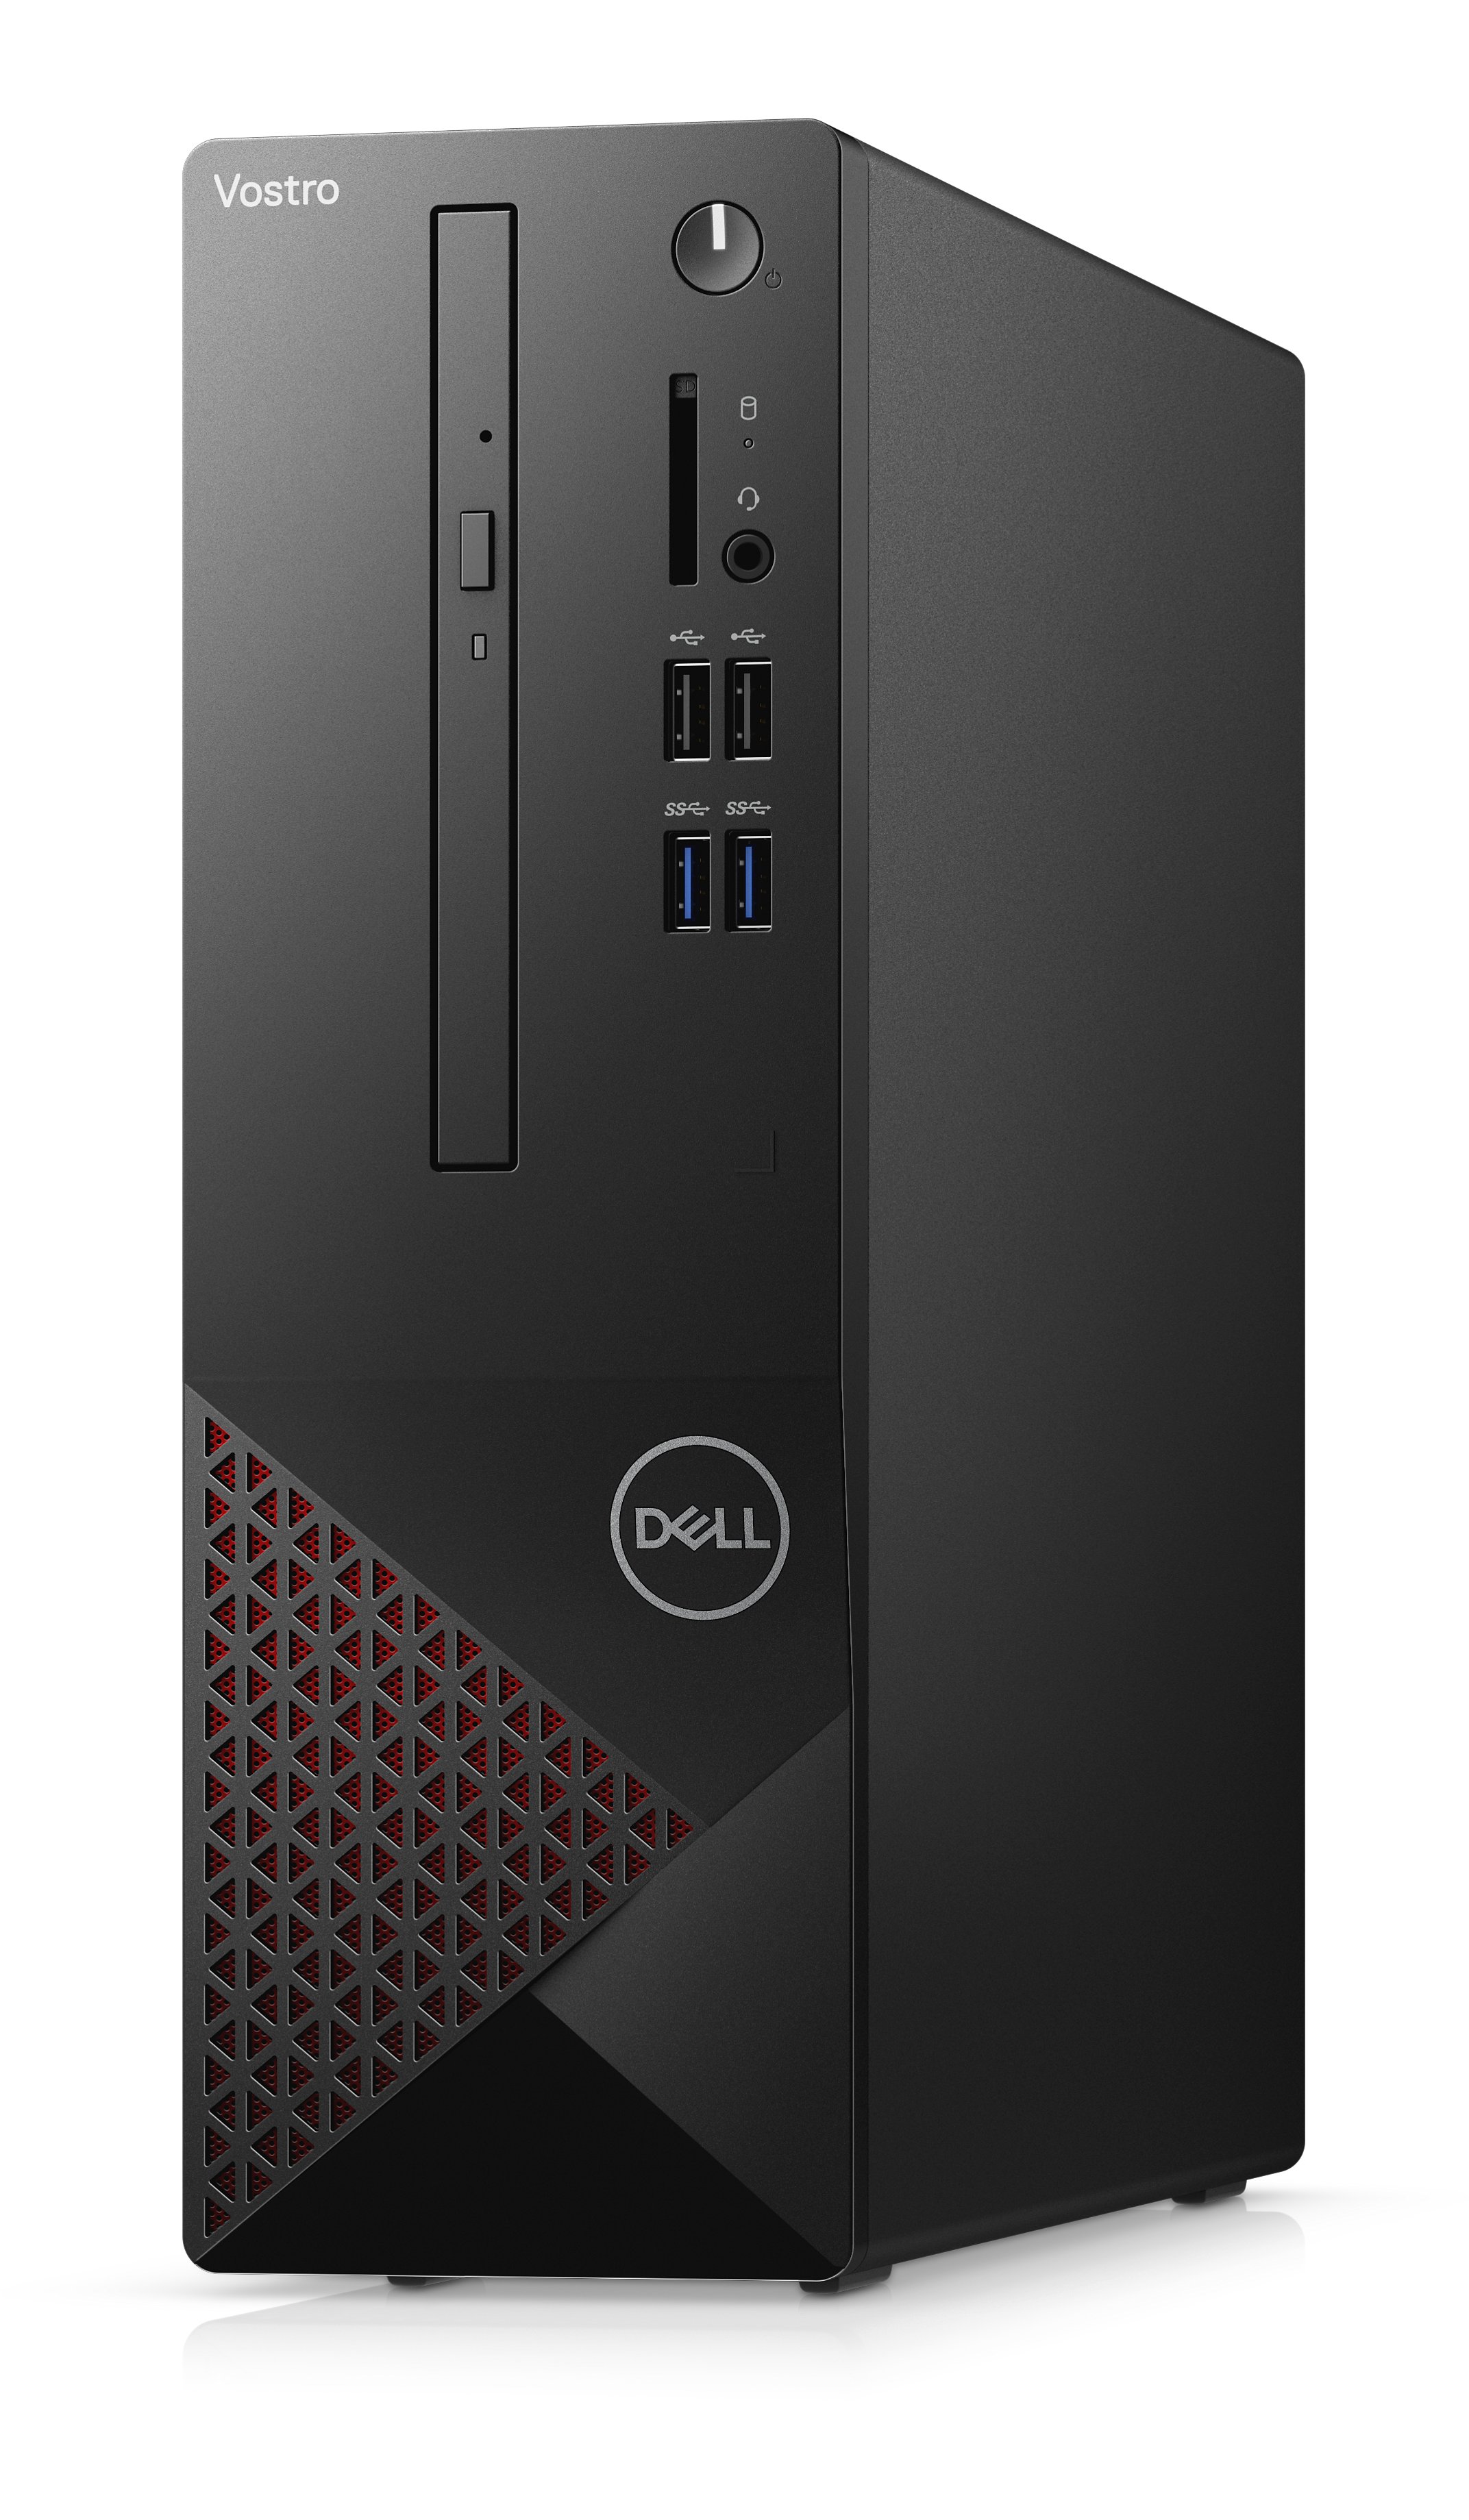 PC Dell Vostro 3681 70226500 Intel Core i7-10700(2.90 GHz,16 MB),8GB RAM,512GB SSD,DVDRW,WL+BT,Mouse,Keyboard,McAfeeMDS,Win 10 Home,1Yr,